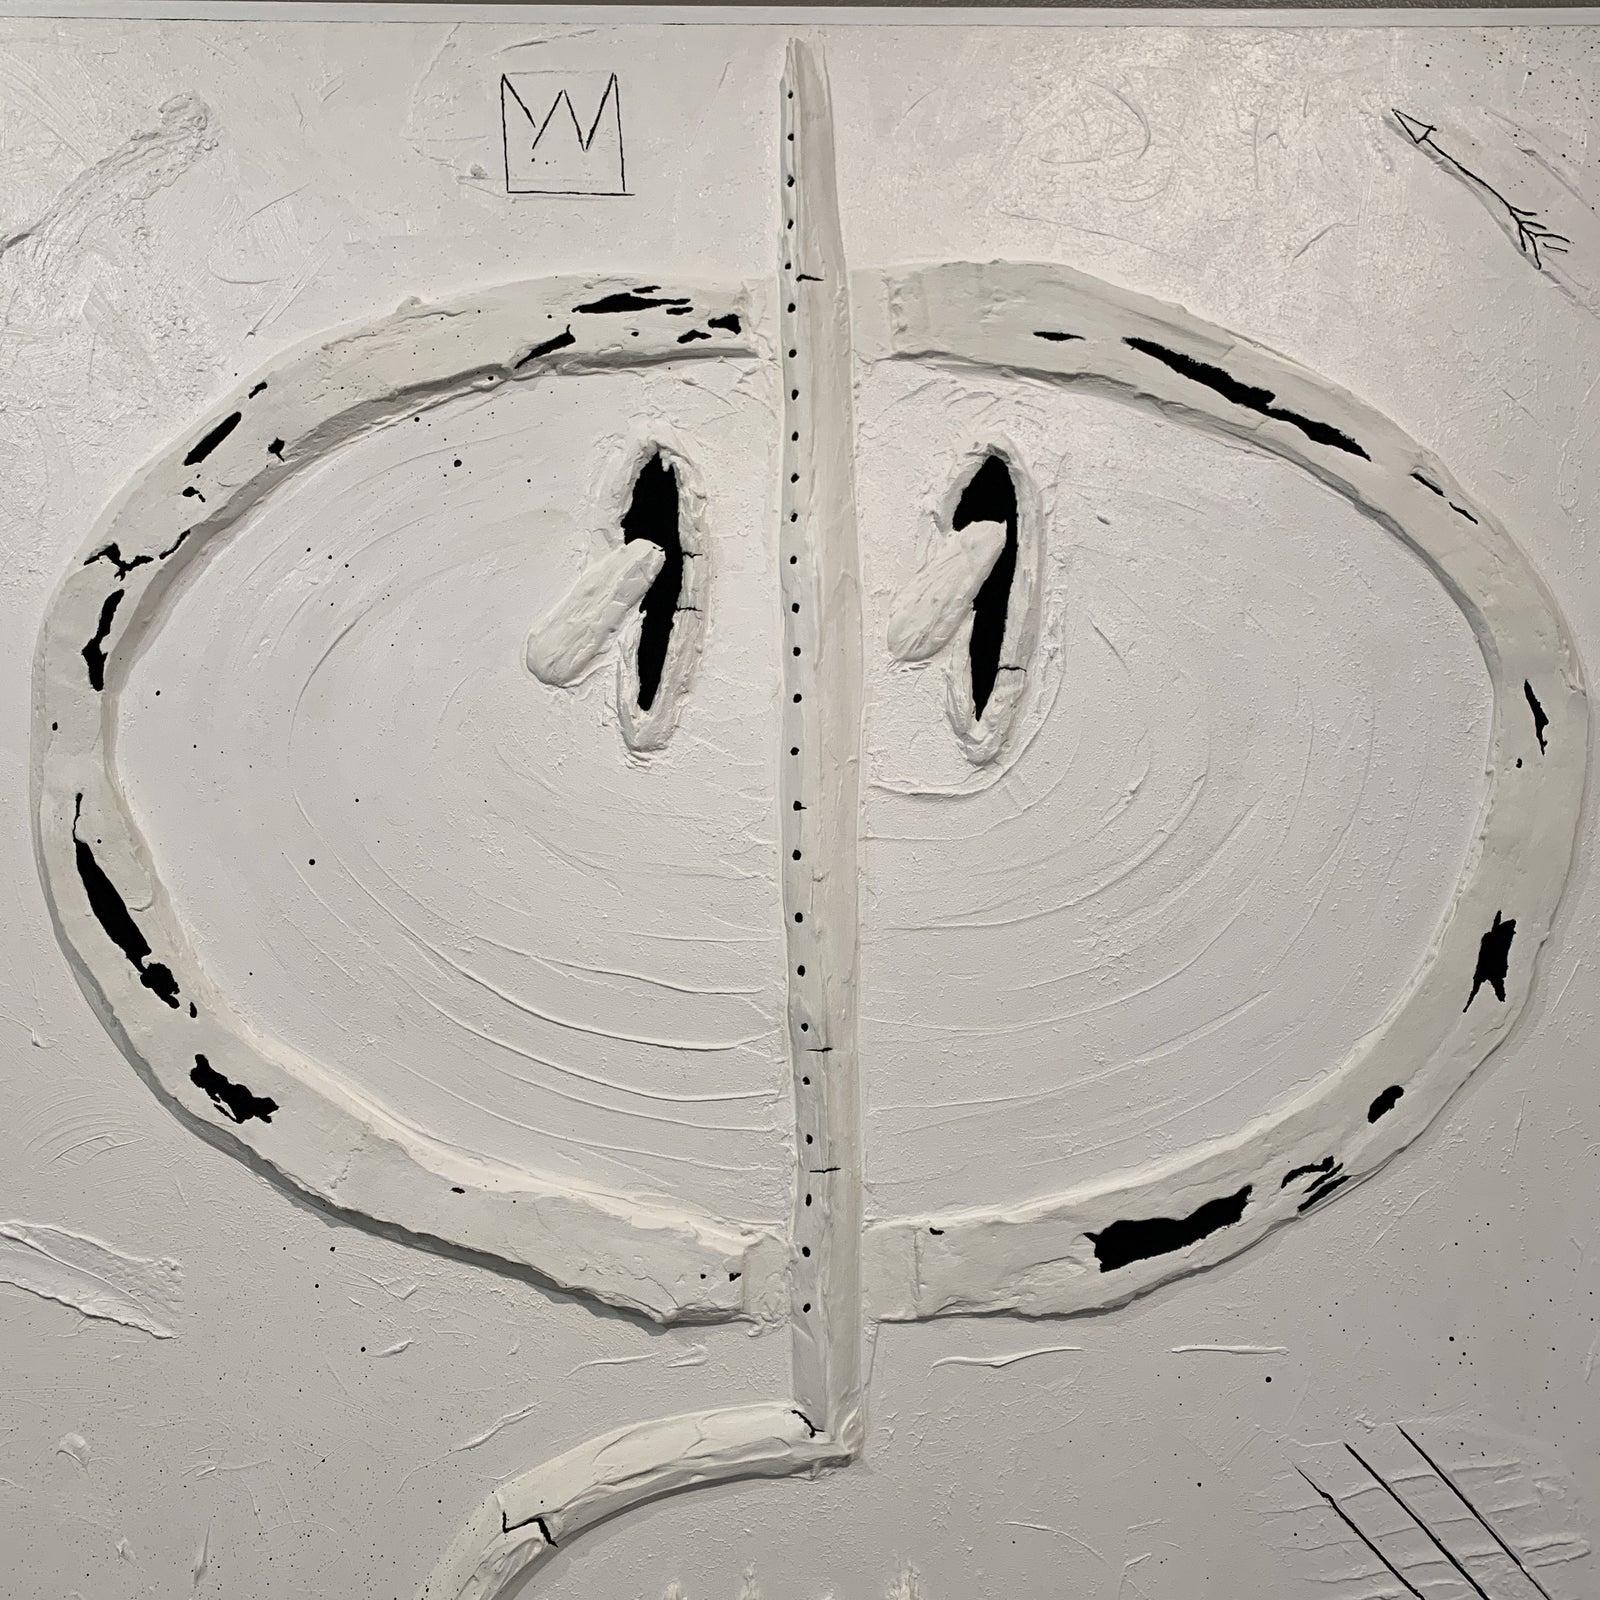 Artist: Hopeton St Clair Hibbert

Plaster & Paint
Framed on Wooden Panel
Mixed Media

Veeer Thourgh the Profound is a series of acrylic and plaster on wood panel. A display of highly textured abstract curvature in white with crevasse in black.
To